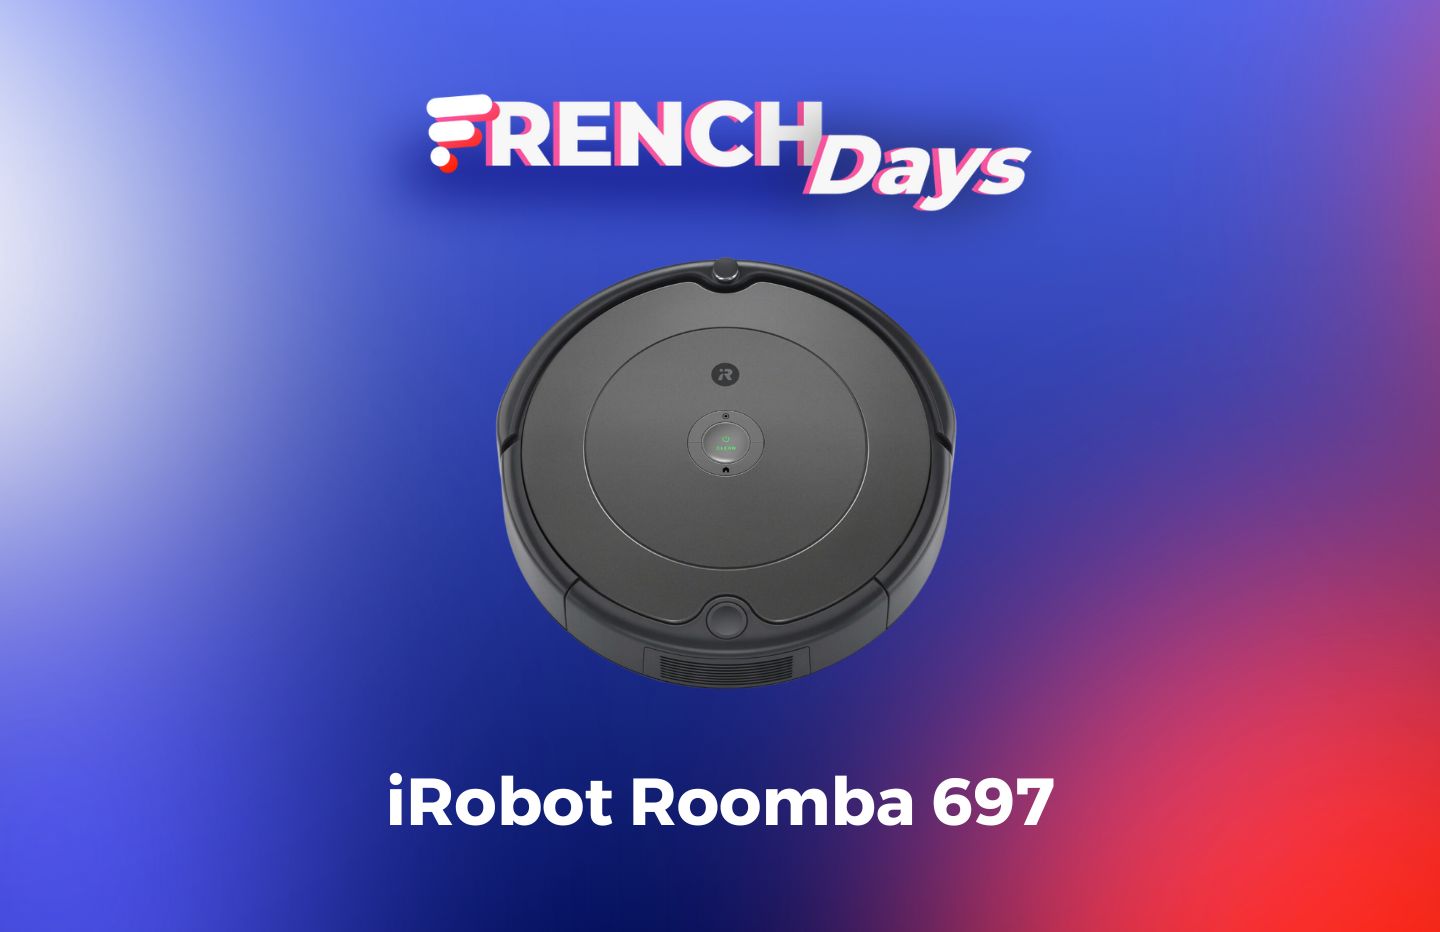 A robot vacuum cleaner for only €179? It's possible thanks to